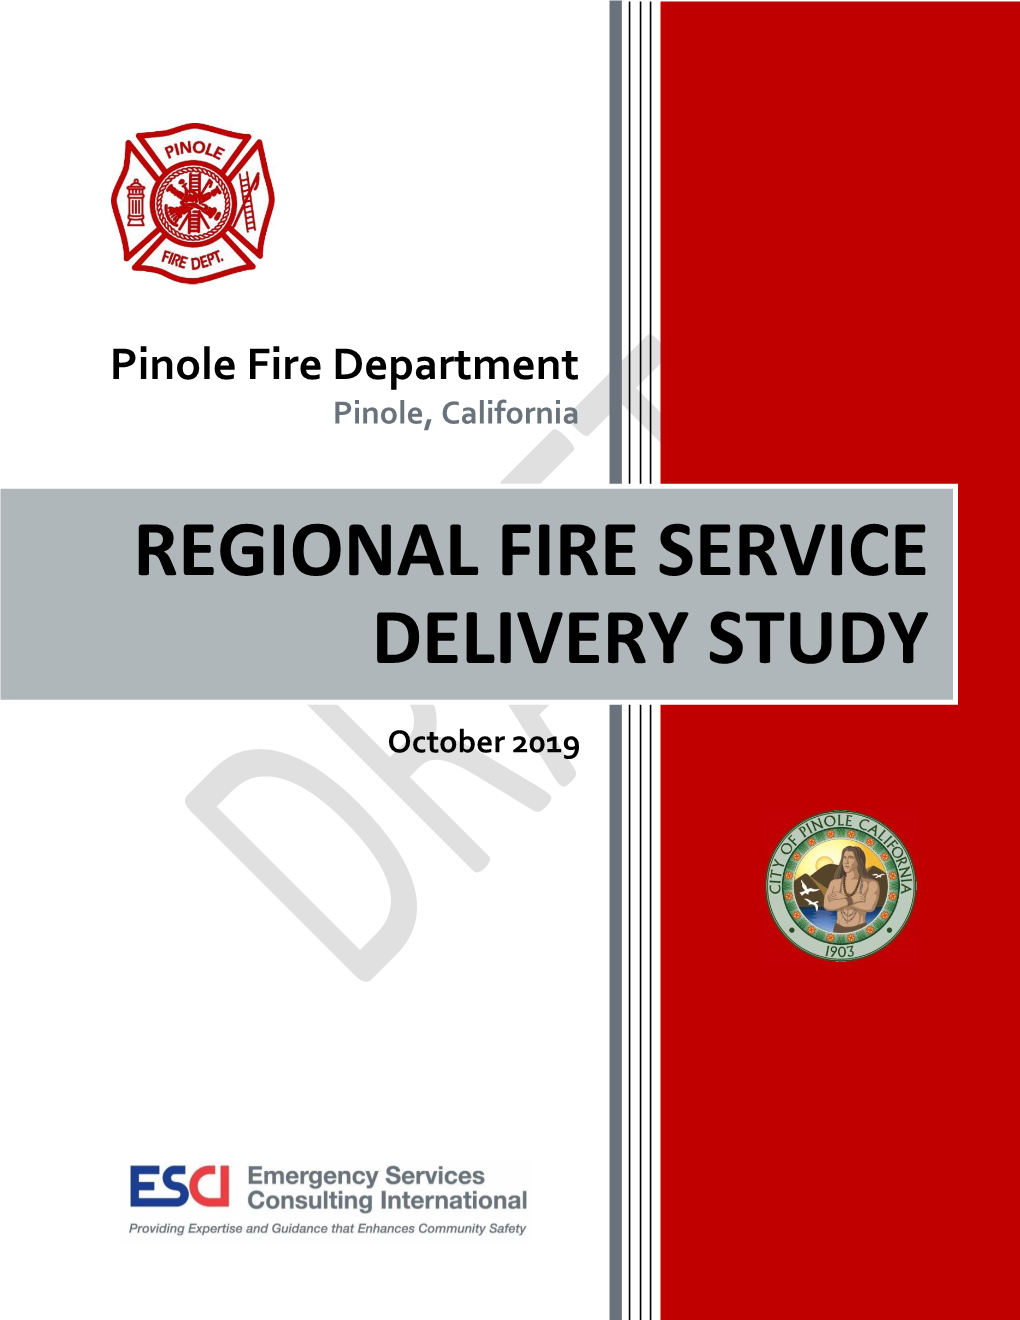 Regional Fire Service Delivery Study